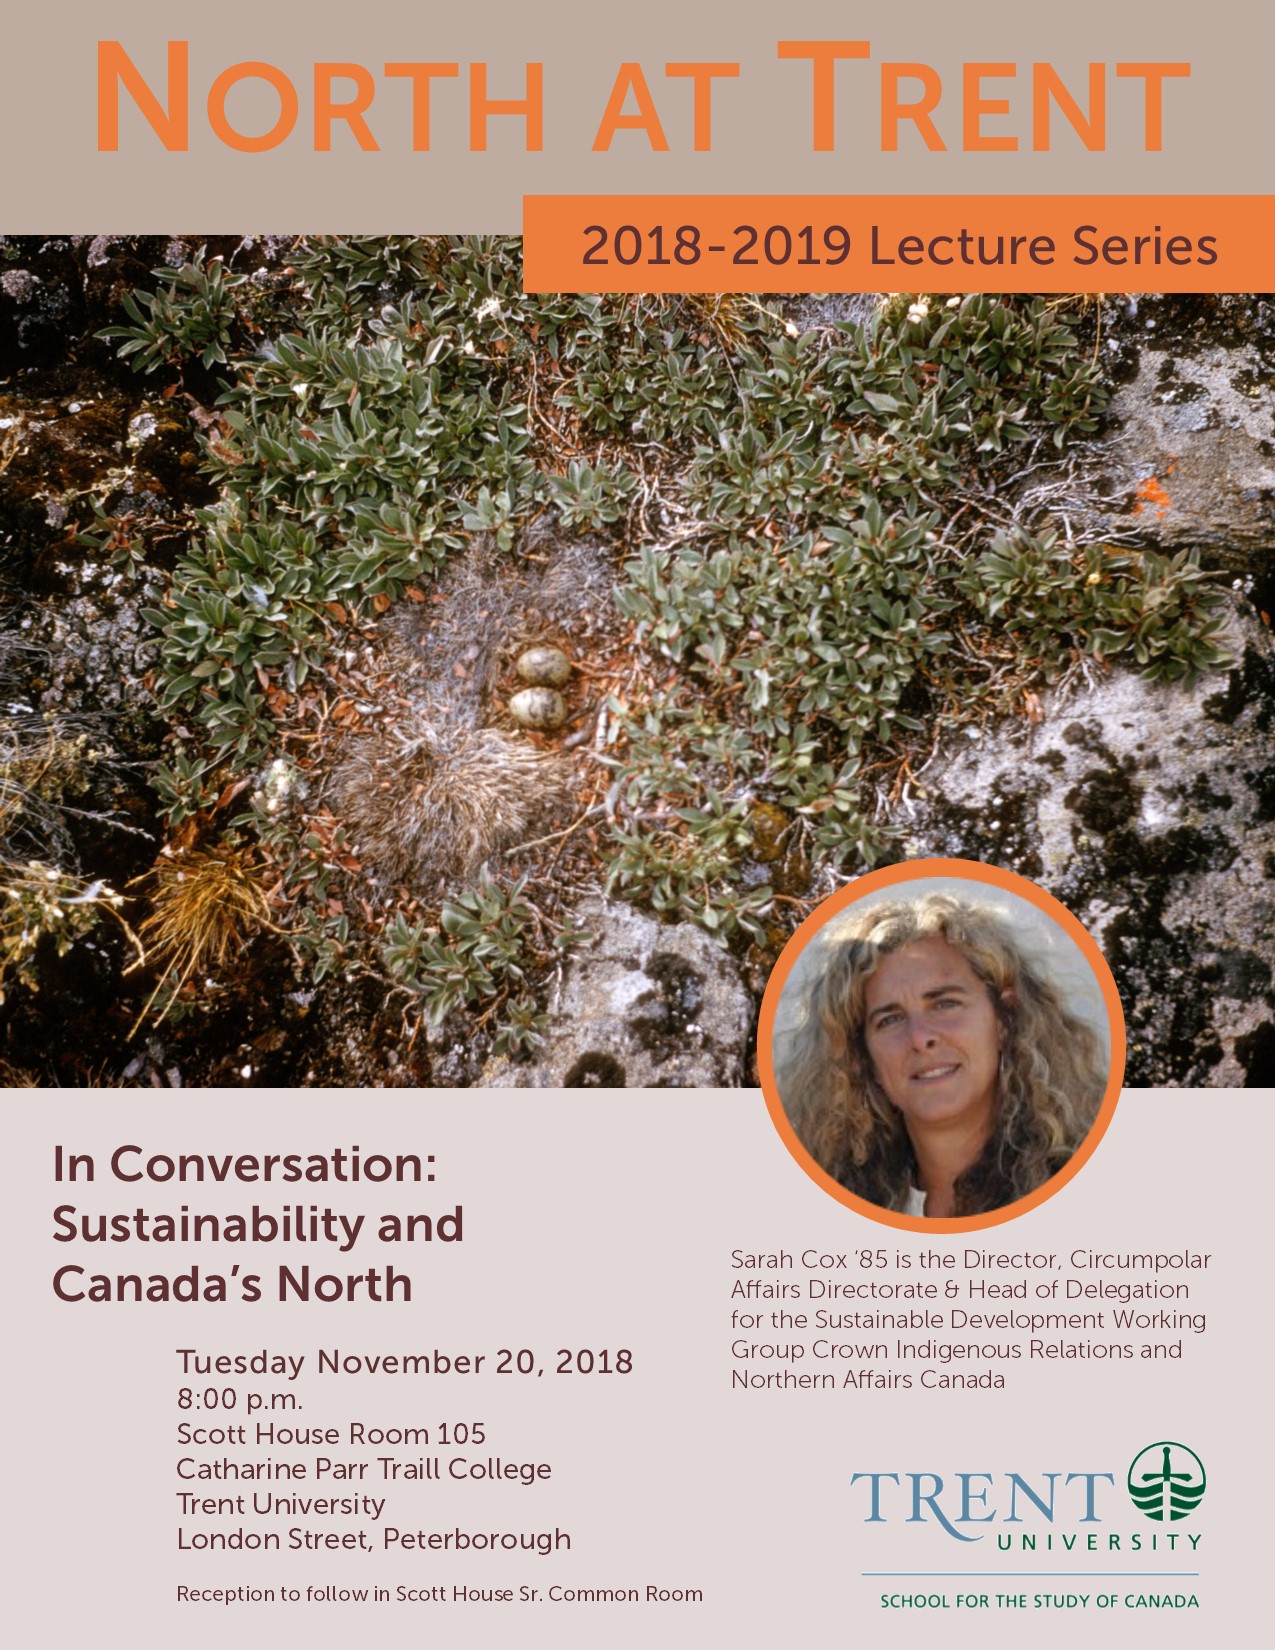 "In Conversation: Sustainability & Canada's North" with Sarah Cox November 2018